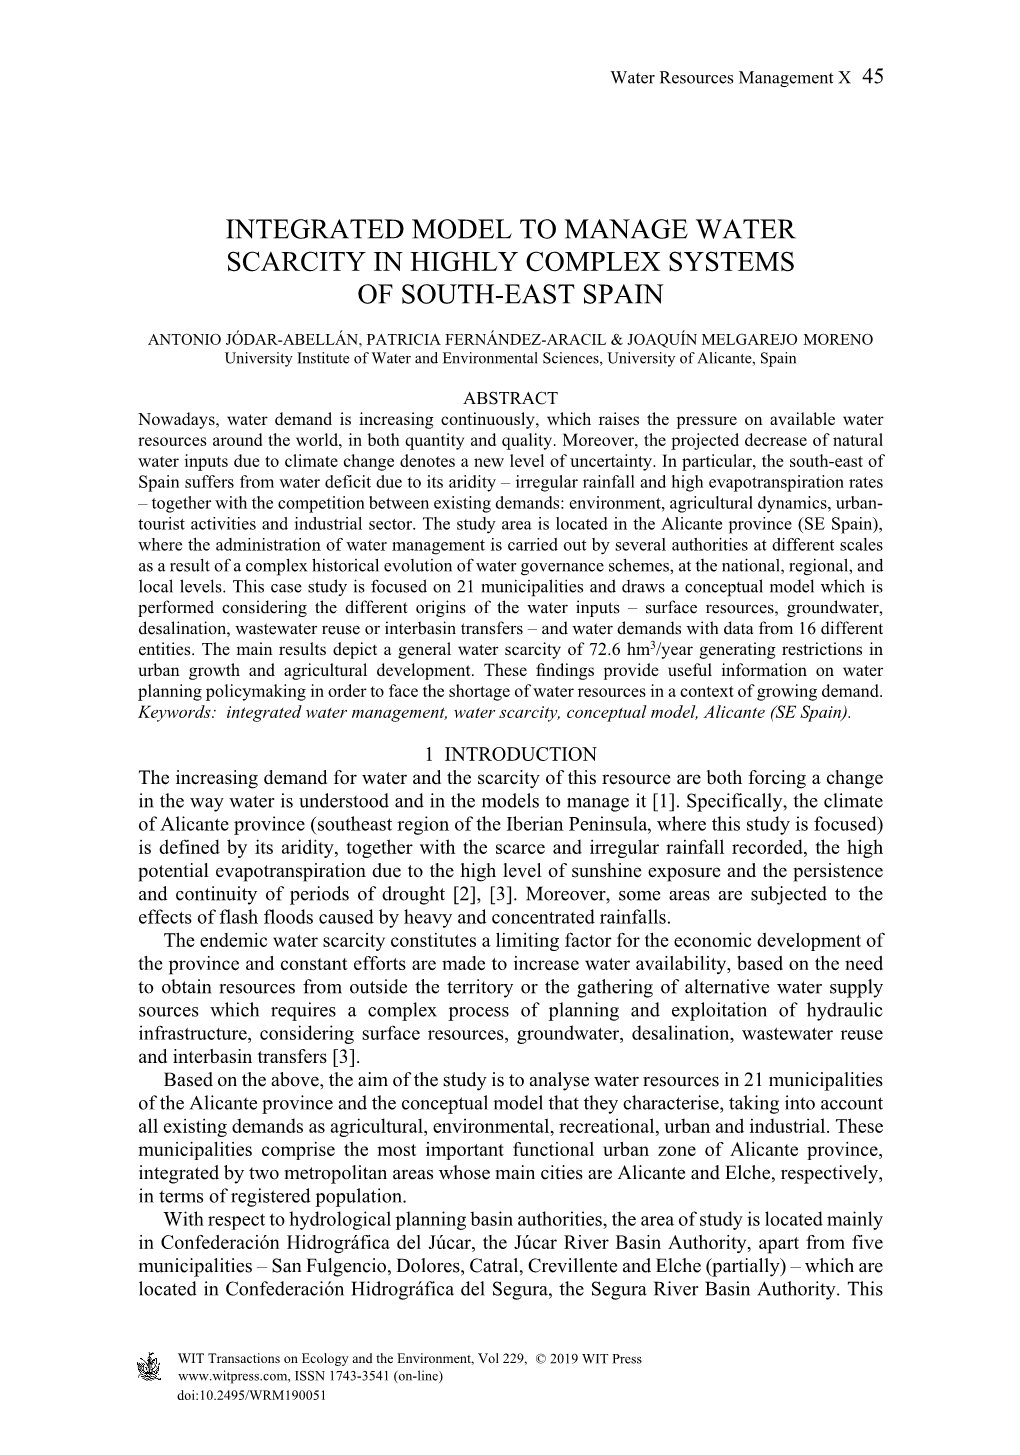 Integrated Model to Manage Water Scarcity in Highly Complex Systems of South-East Spain